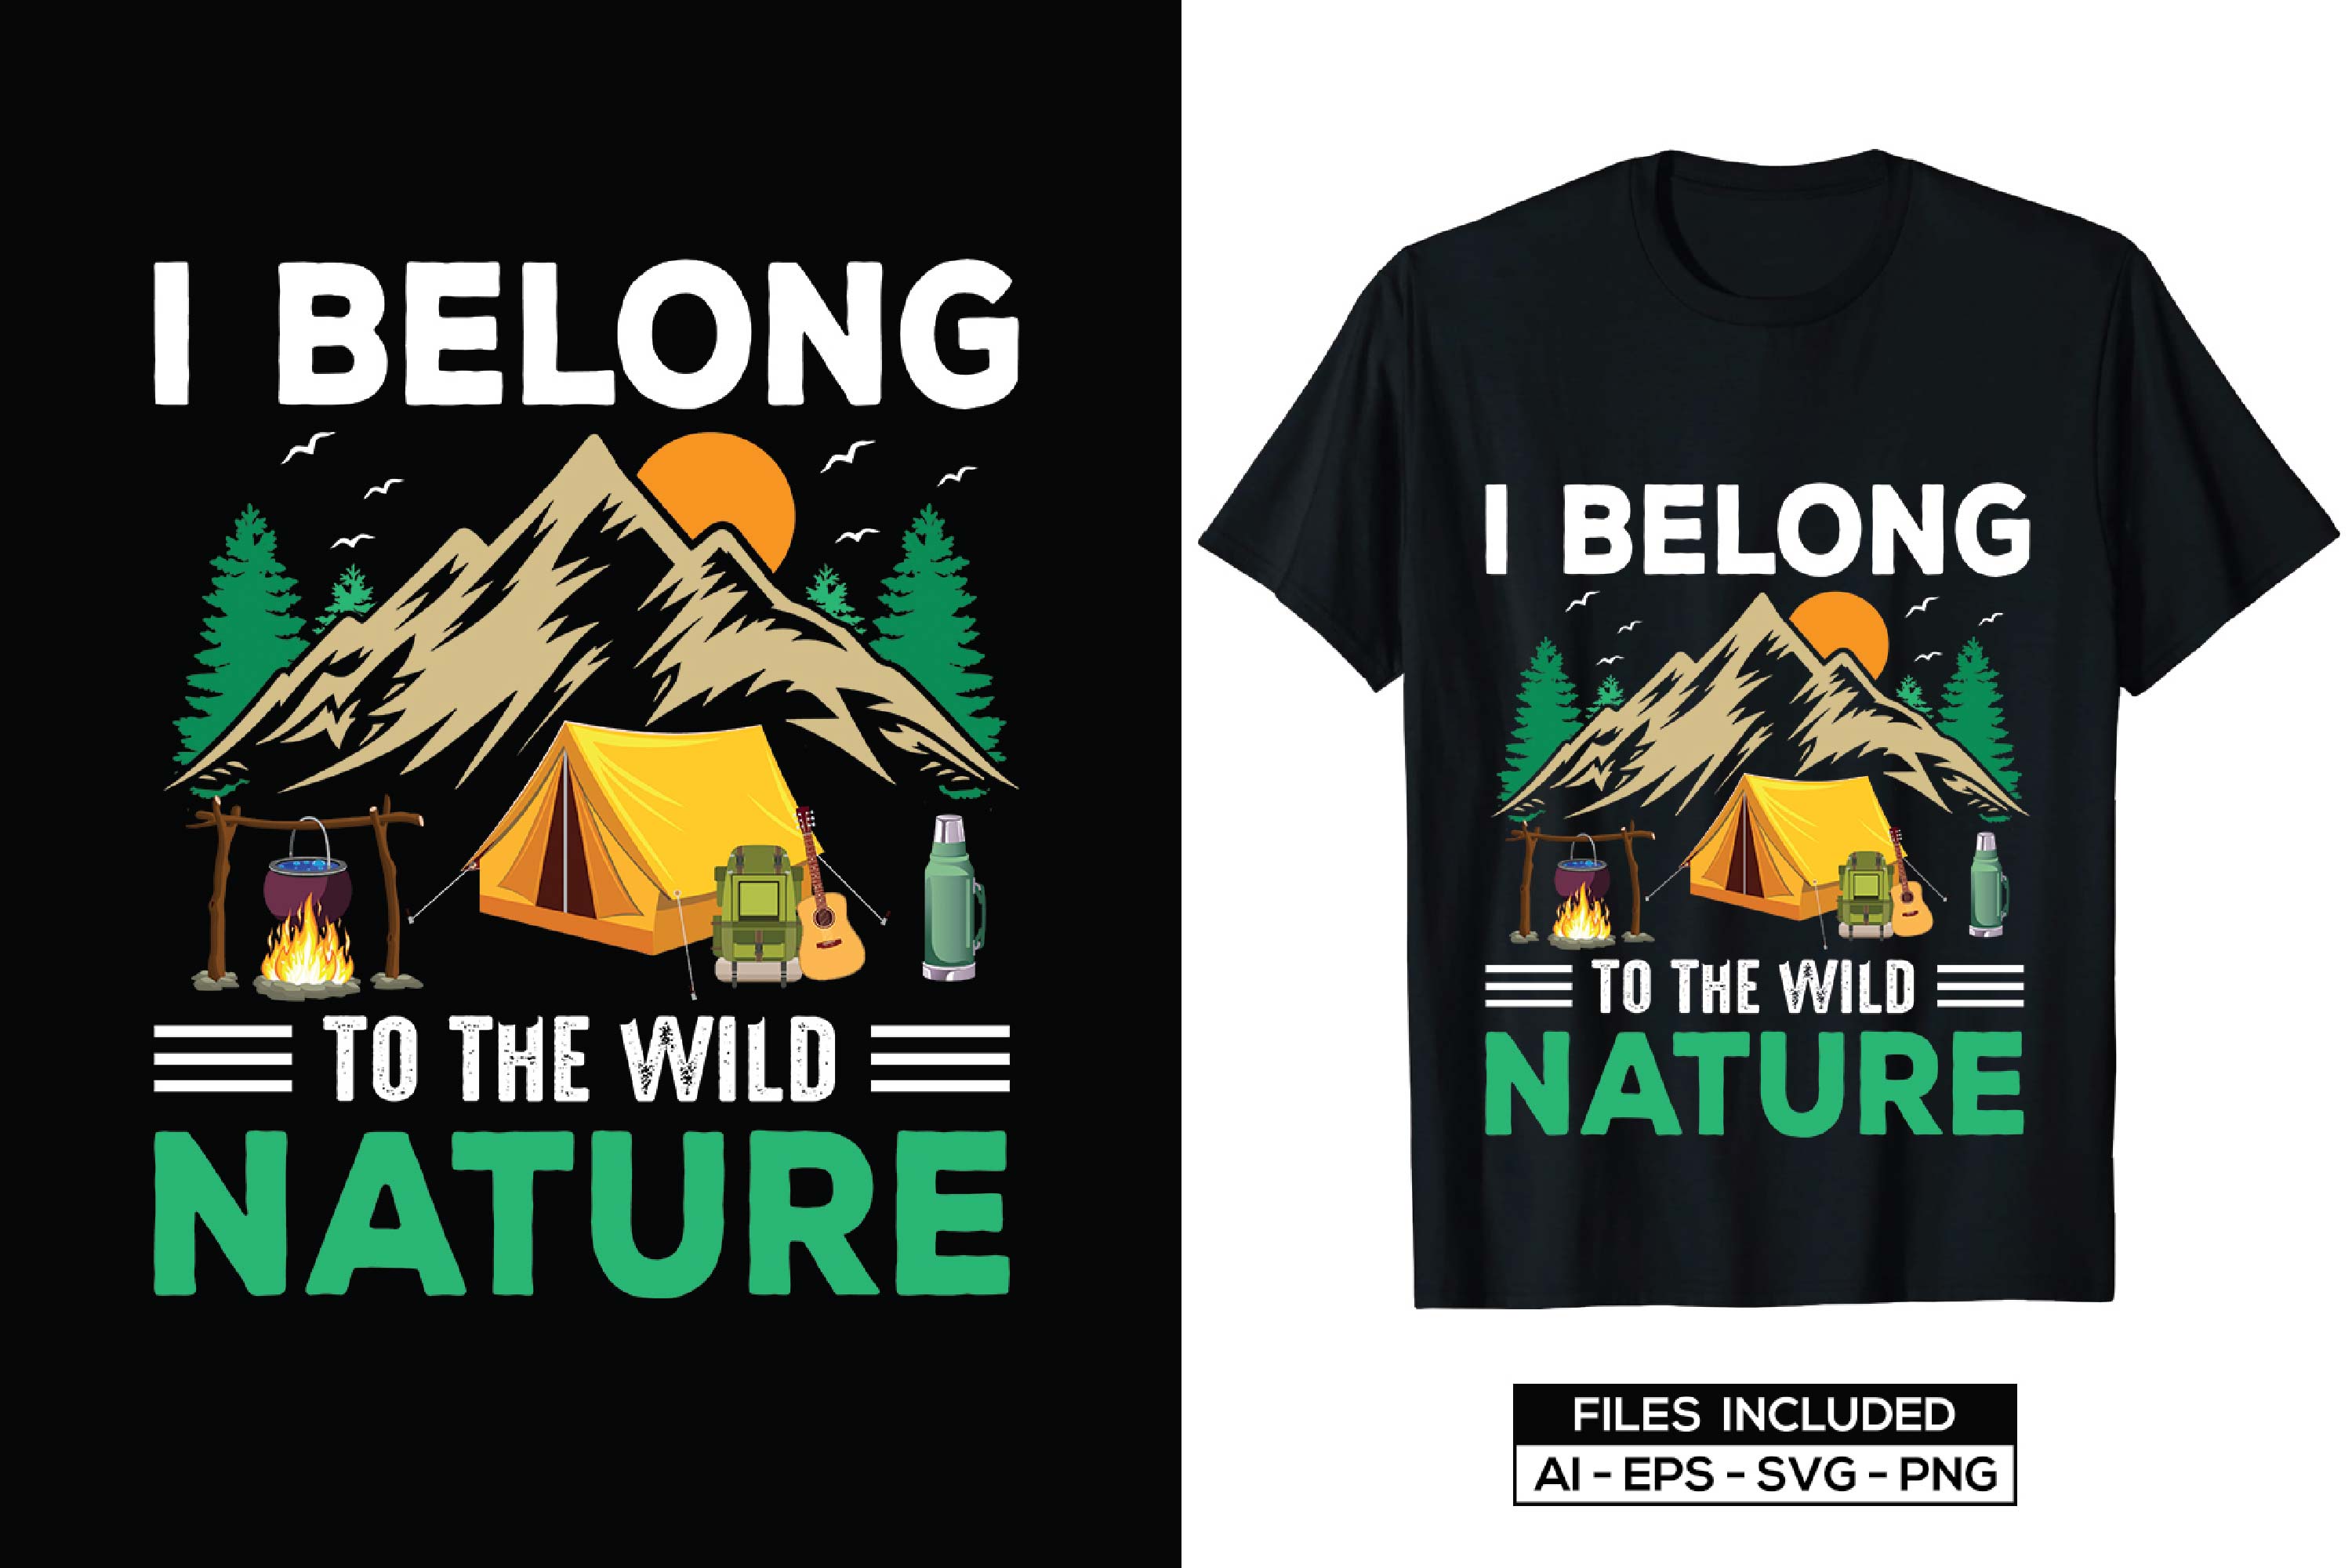 Image of a black t-shirt with a charming print on the theme of camping.